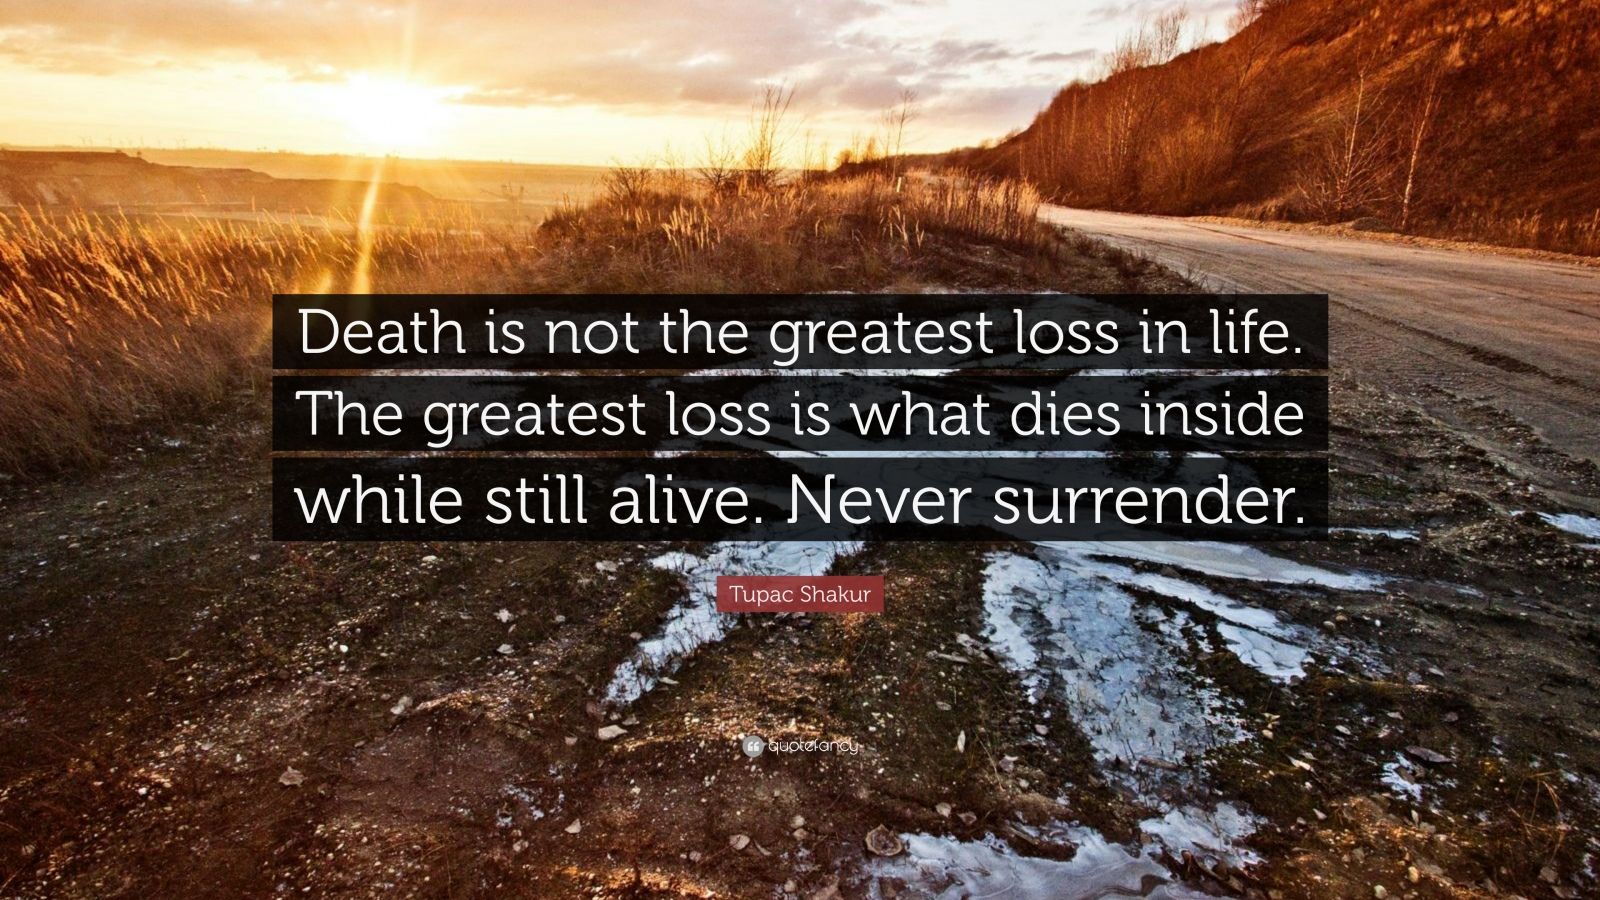 Tupac Shakur Quote “Death is not the greatest loss in life The greatest